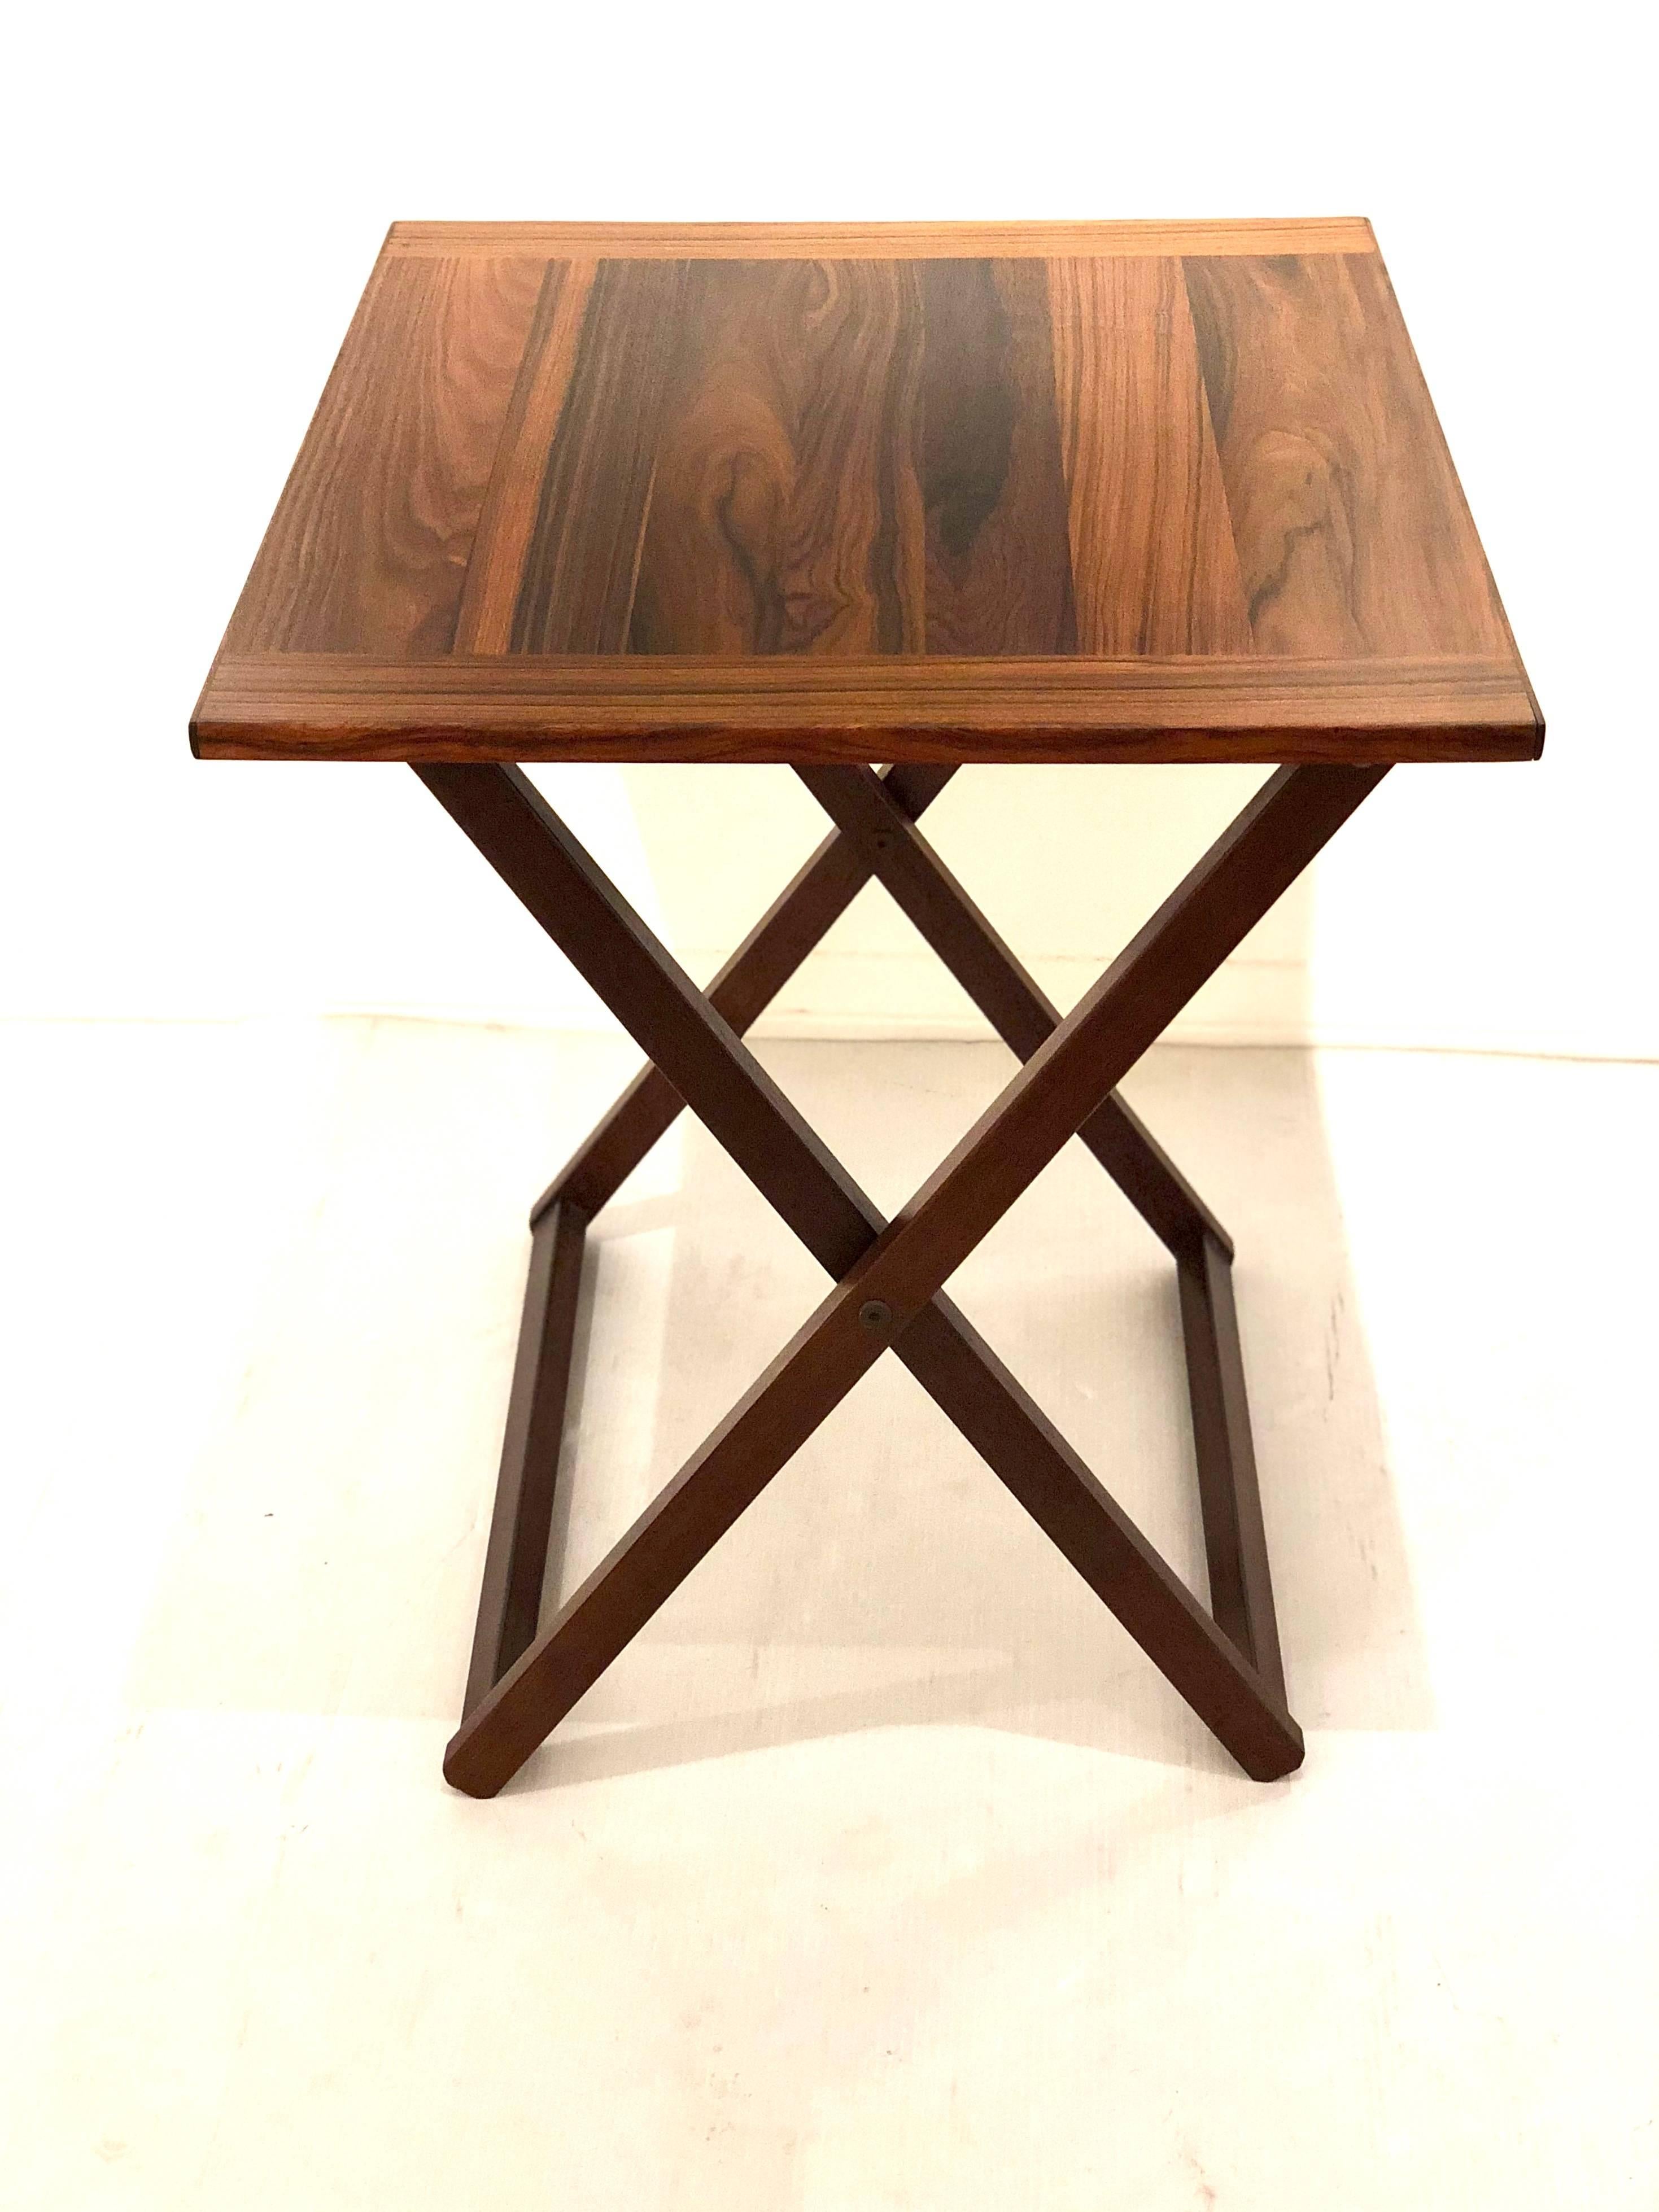 Beautiful grain on this freshly refinished rosewood folding table simple and elegant lines easy to store, versatile and elegant.